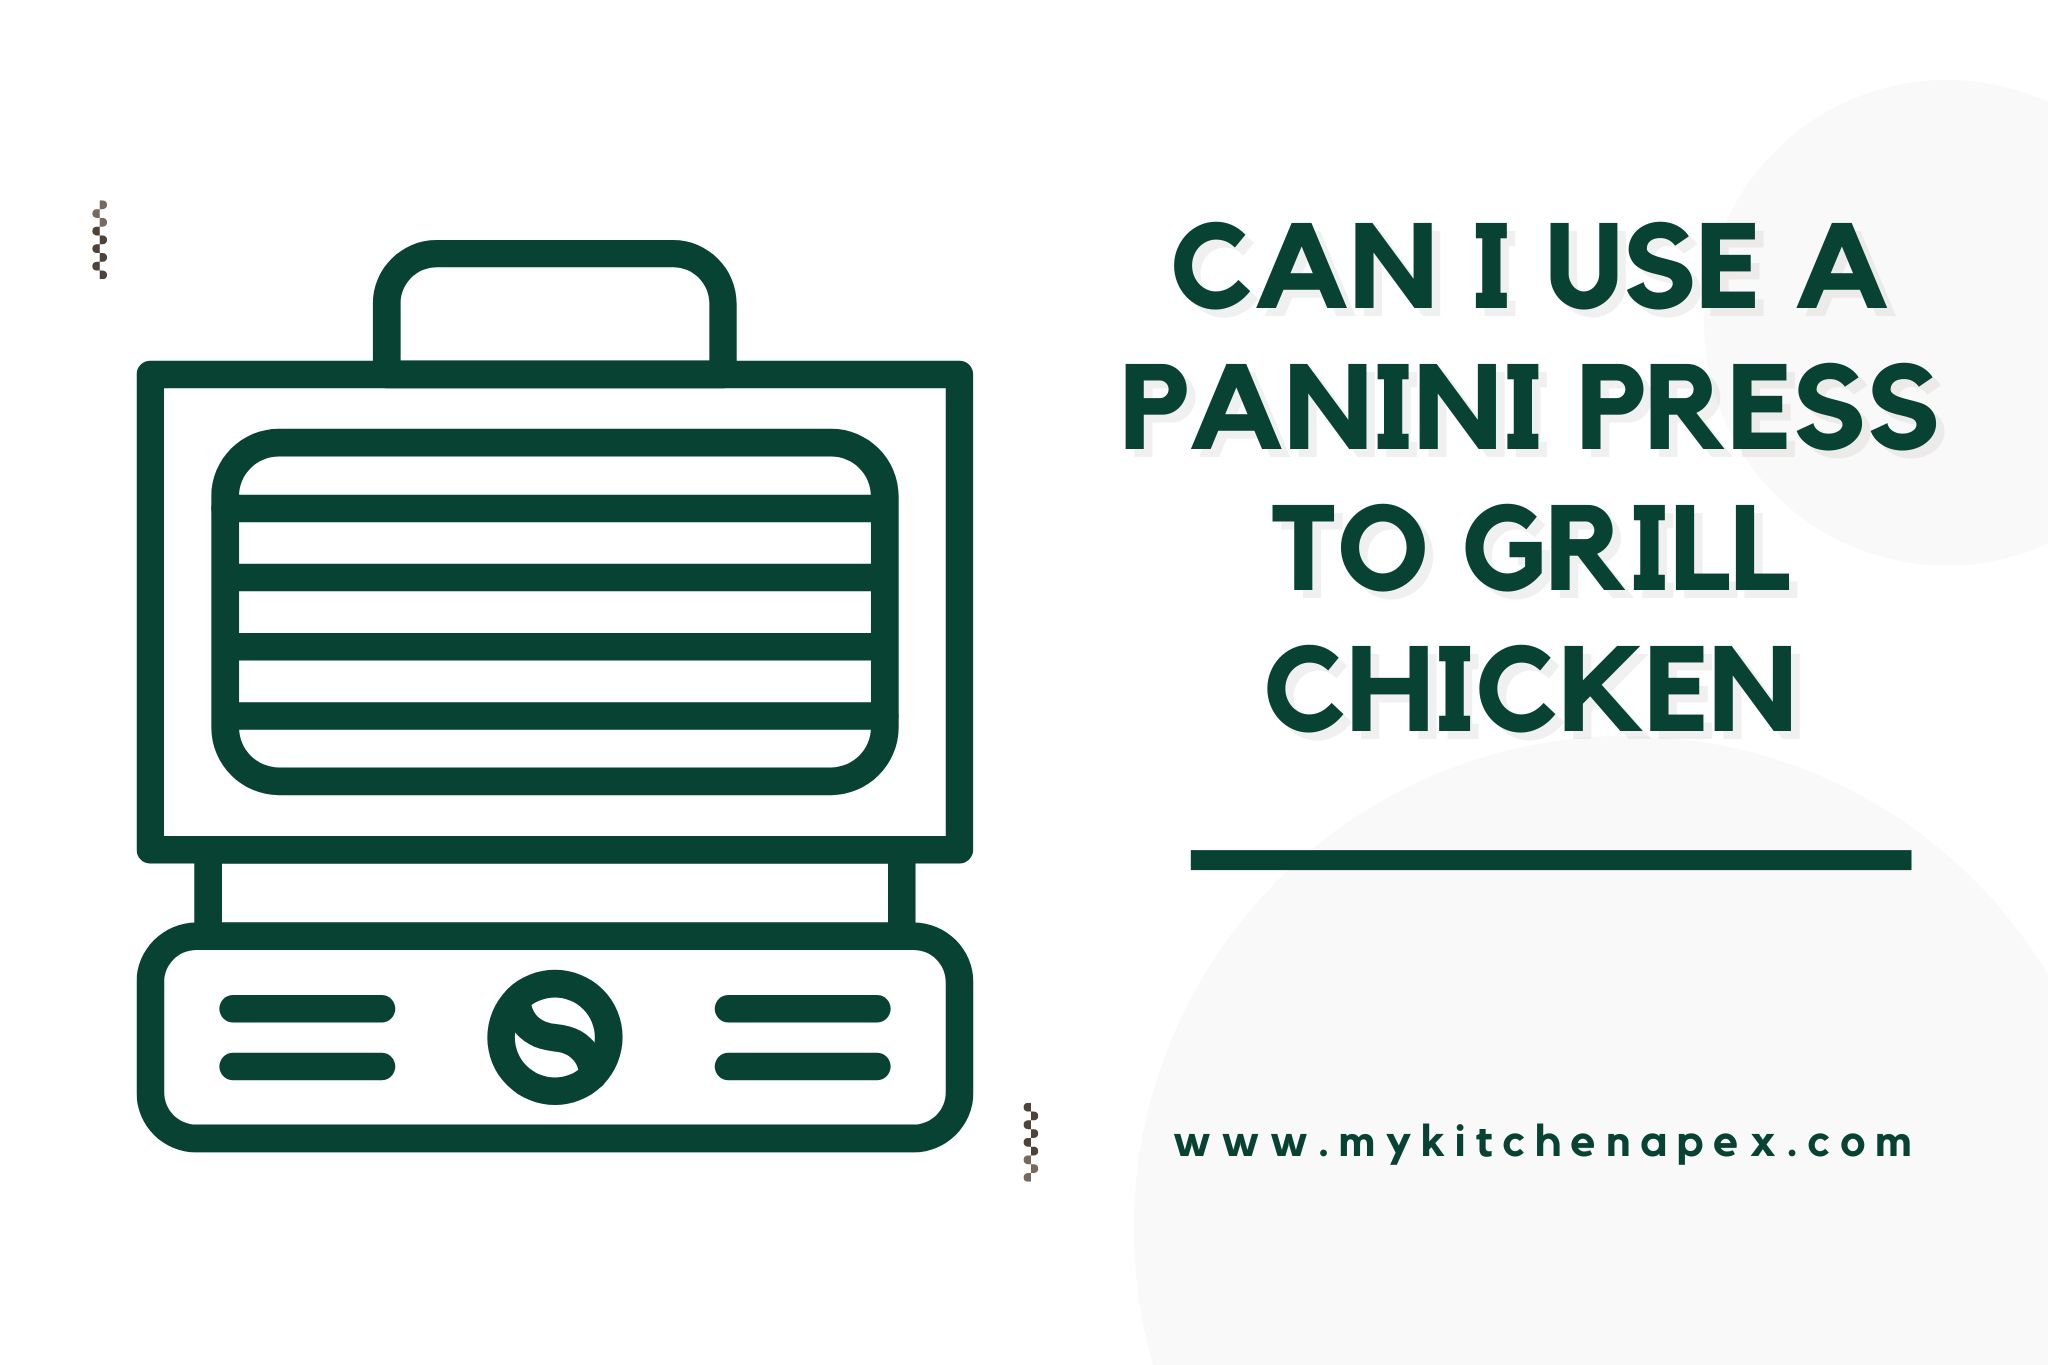 can i use a panini press to grill chicken